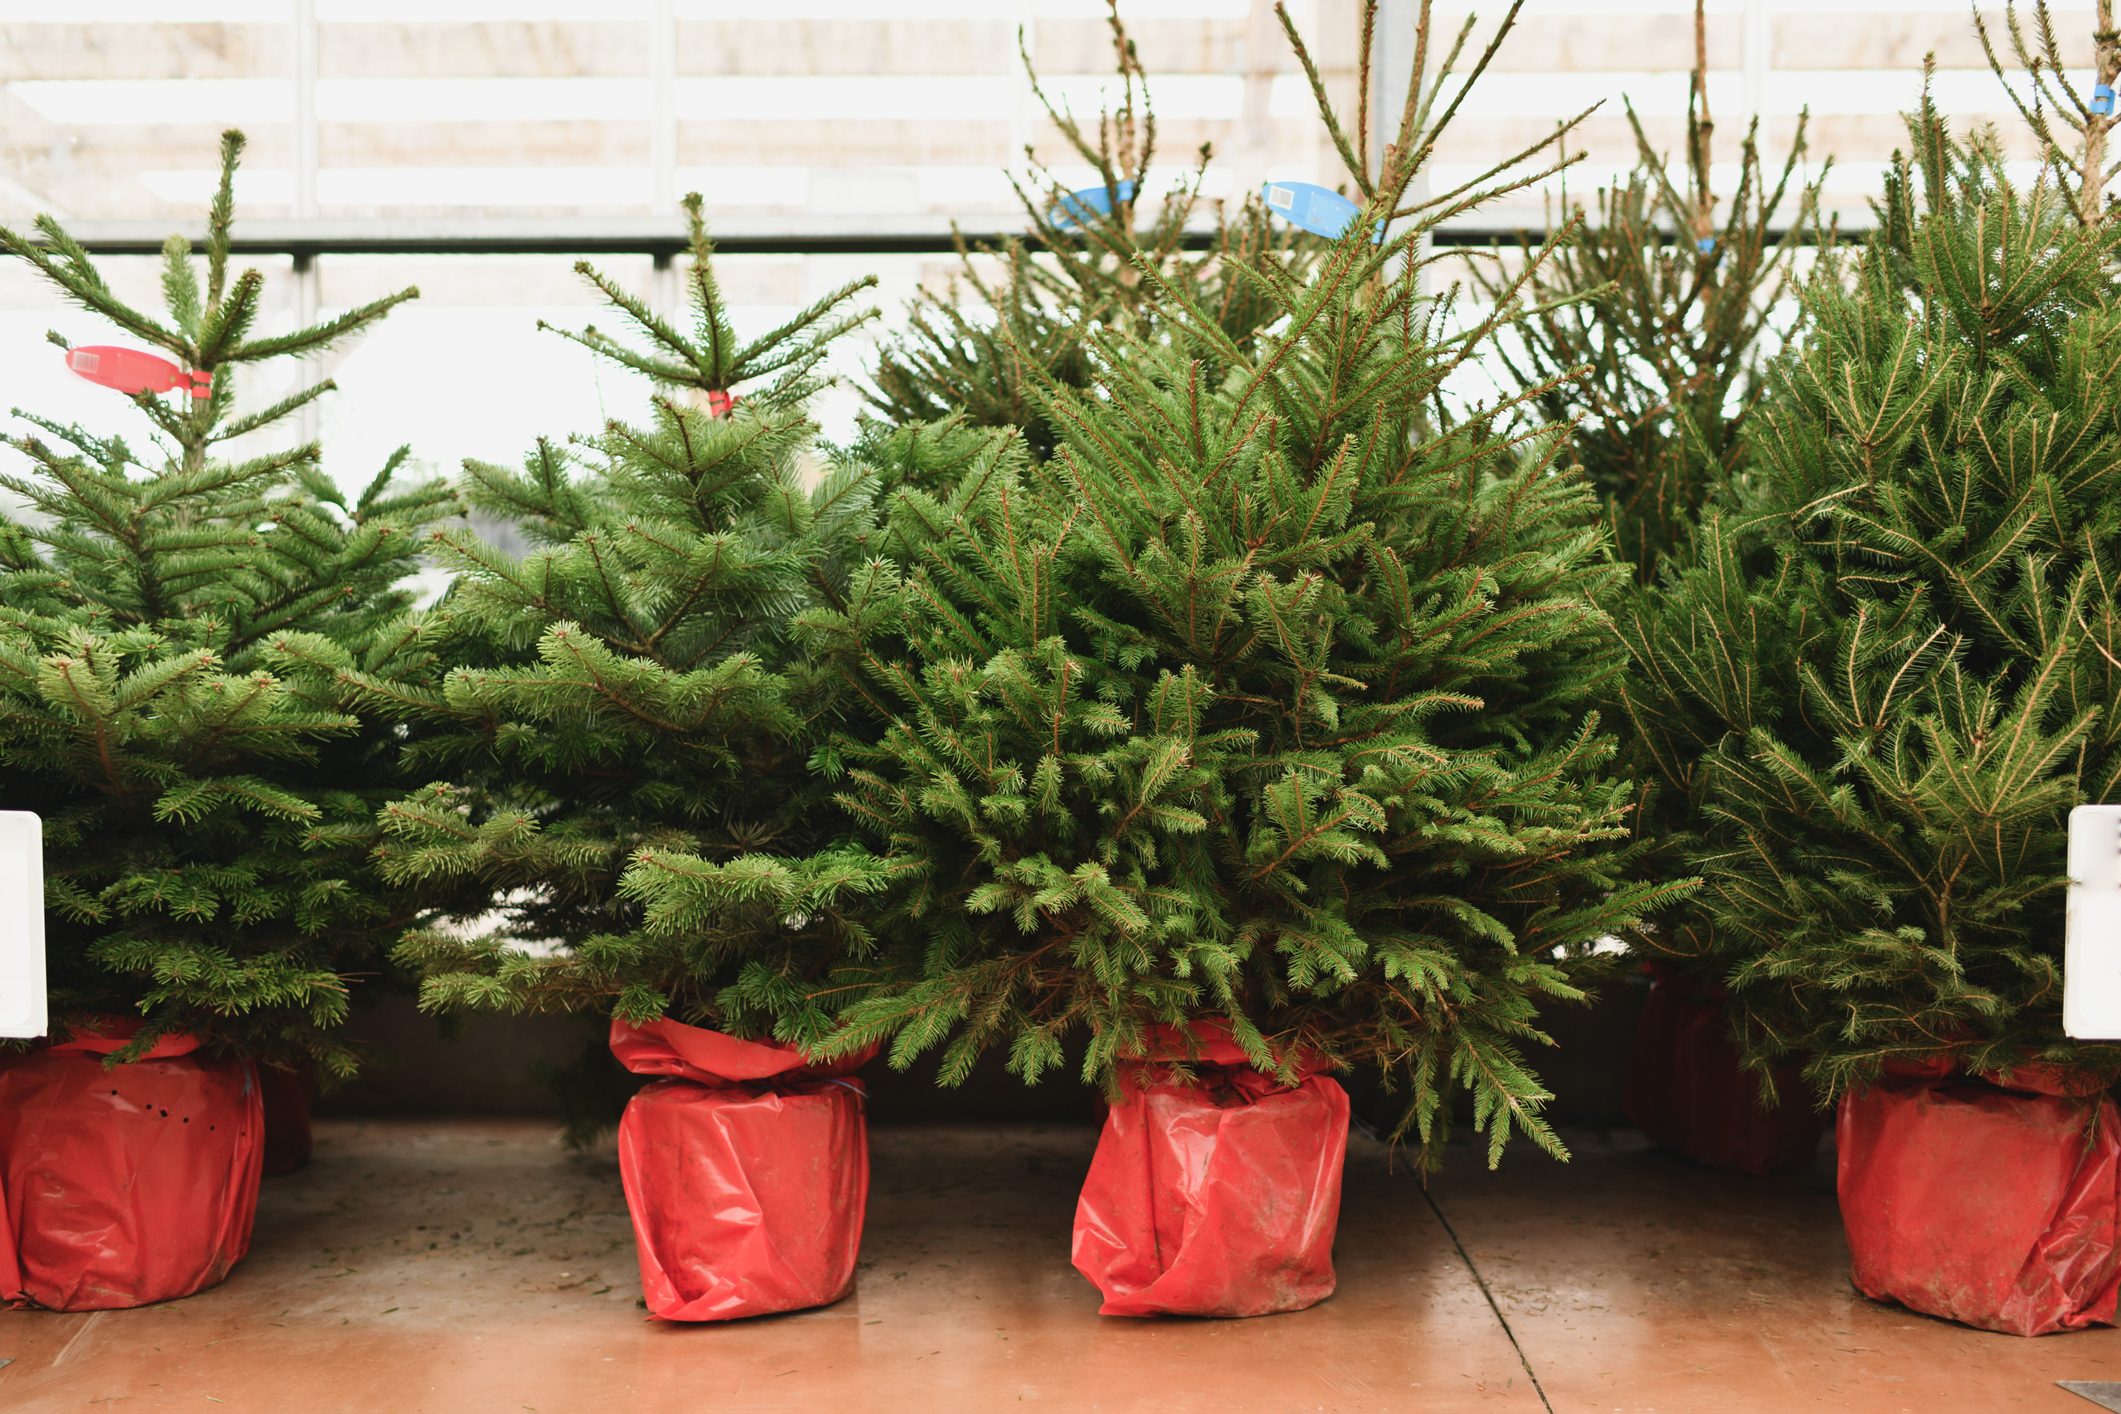 How To Care for a Living Christmas Tree